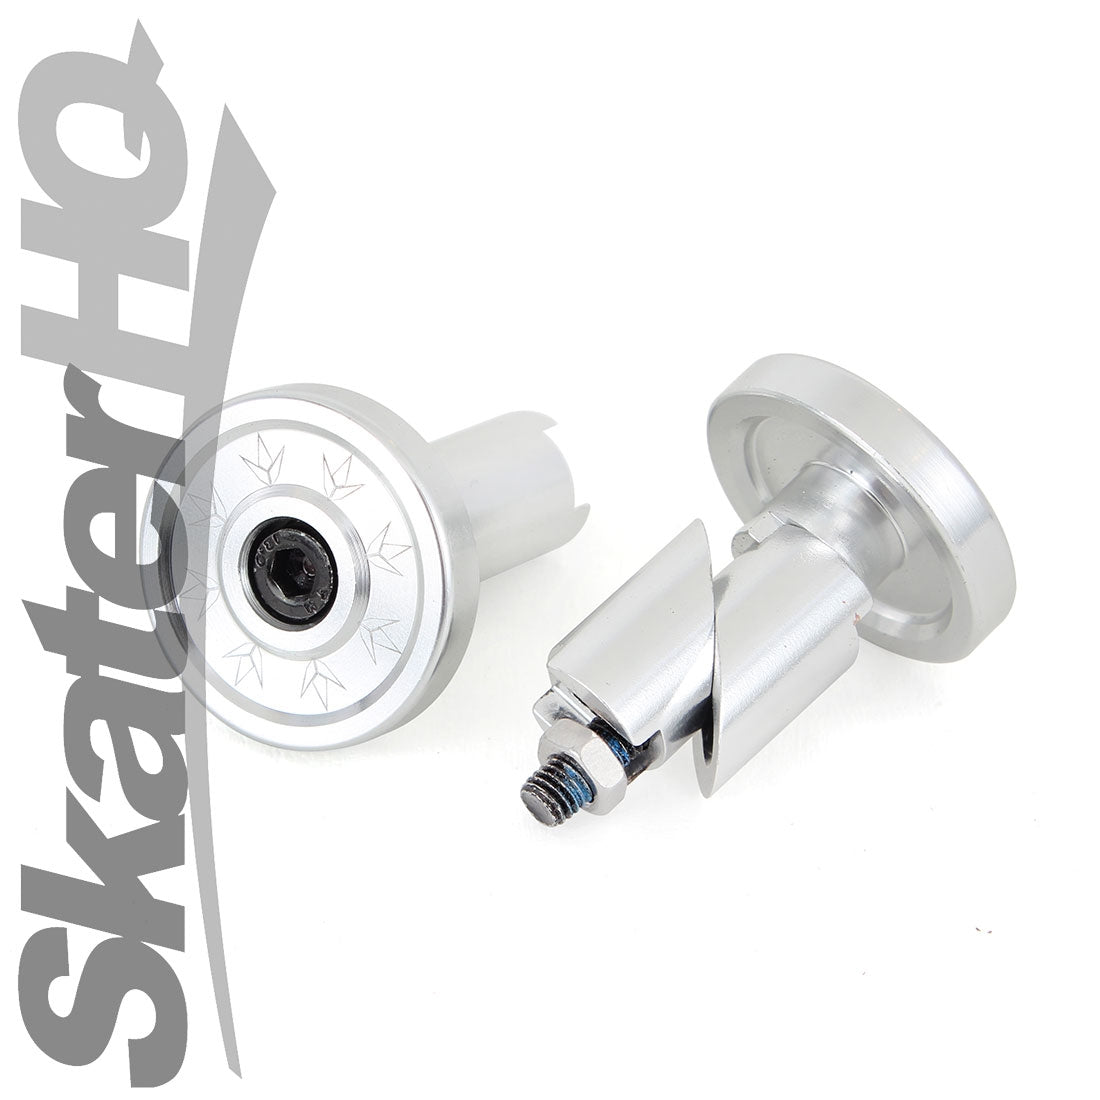 Envy Alloy Bar End Pair - Silver Scooter Hardware and Parts